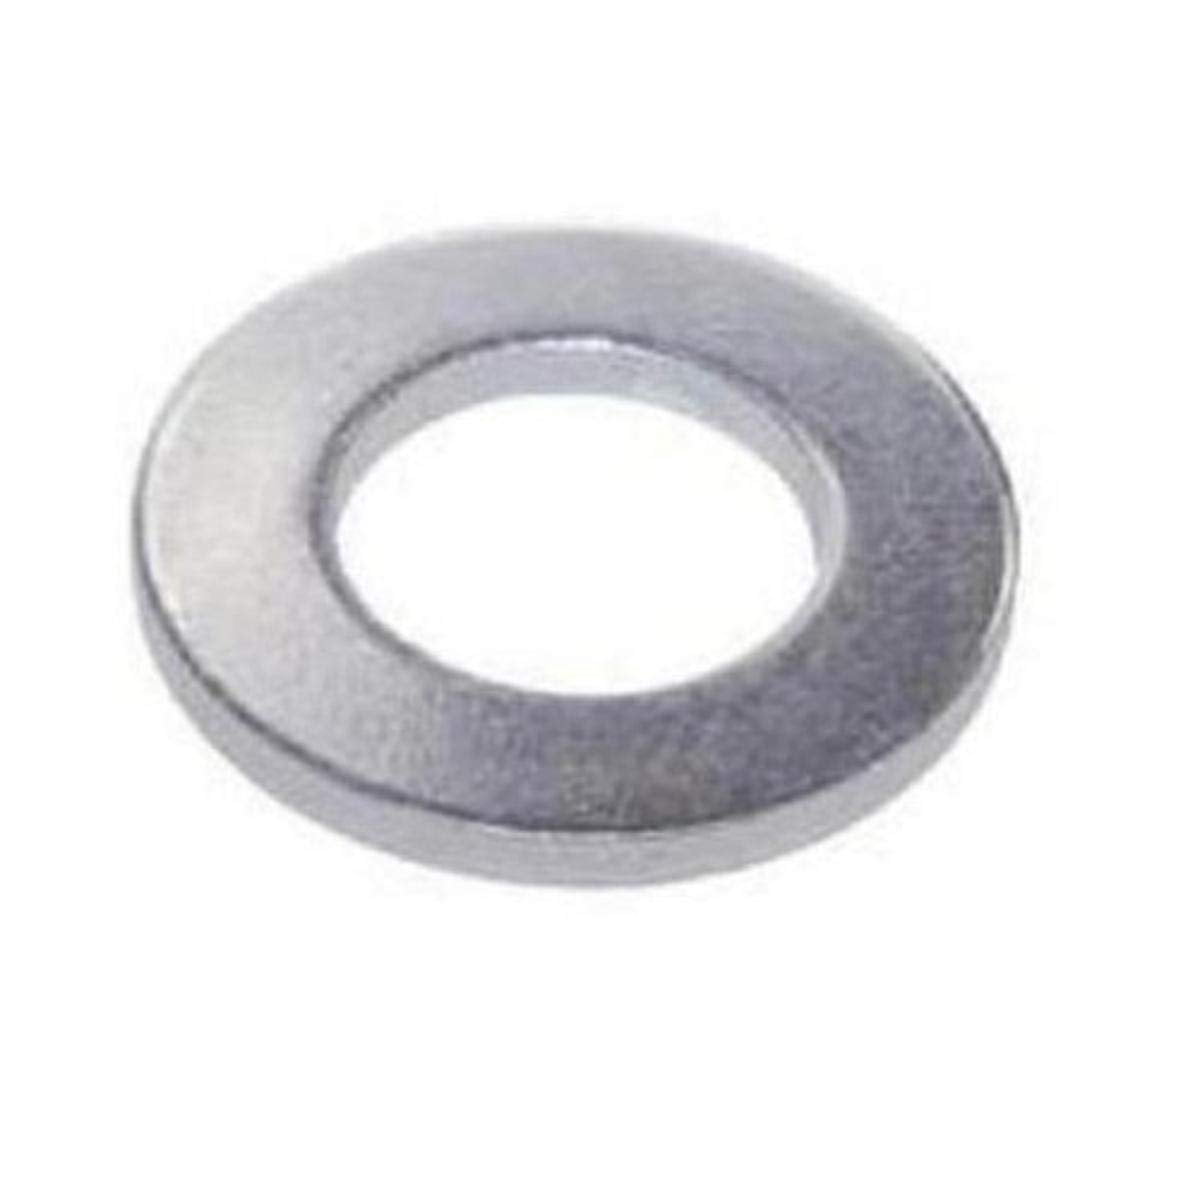 Flat Washer 316 Stainless Steel #10, 1/4, 5/16, 3/8, 1/2 choose size 